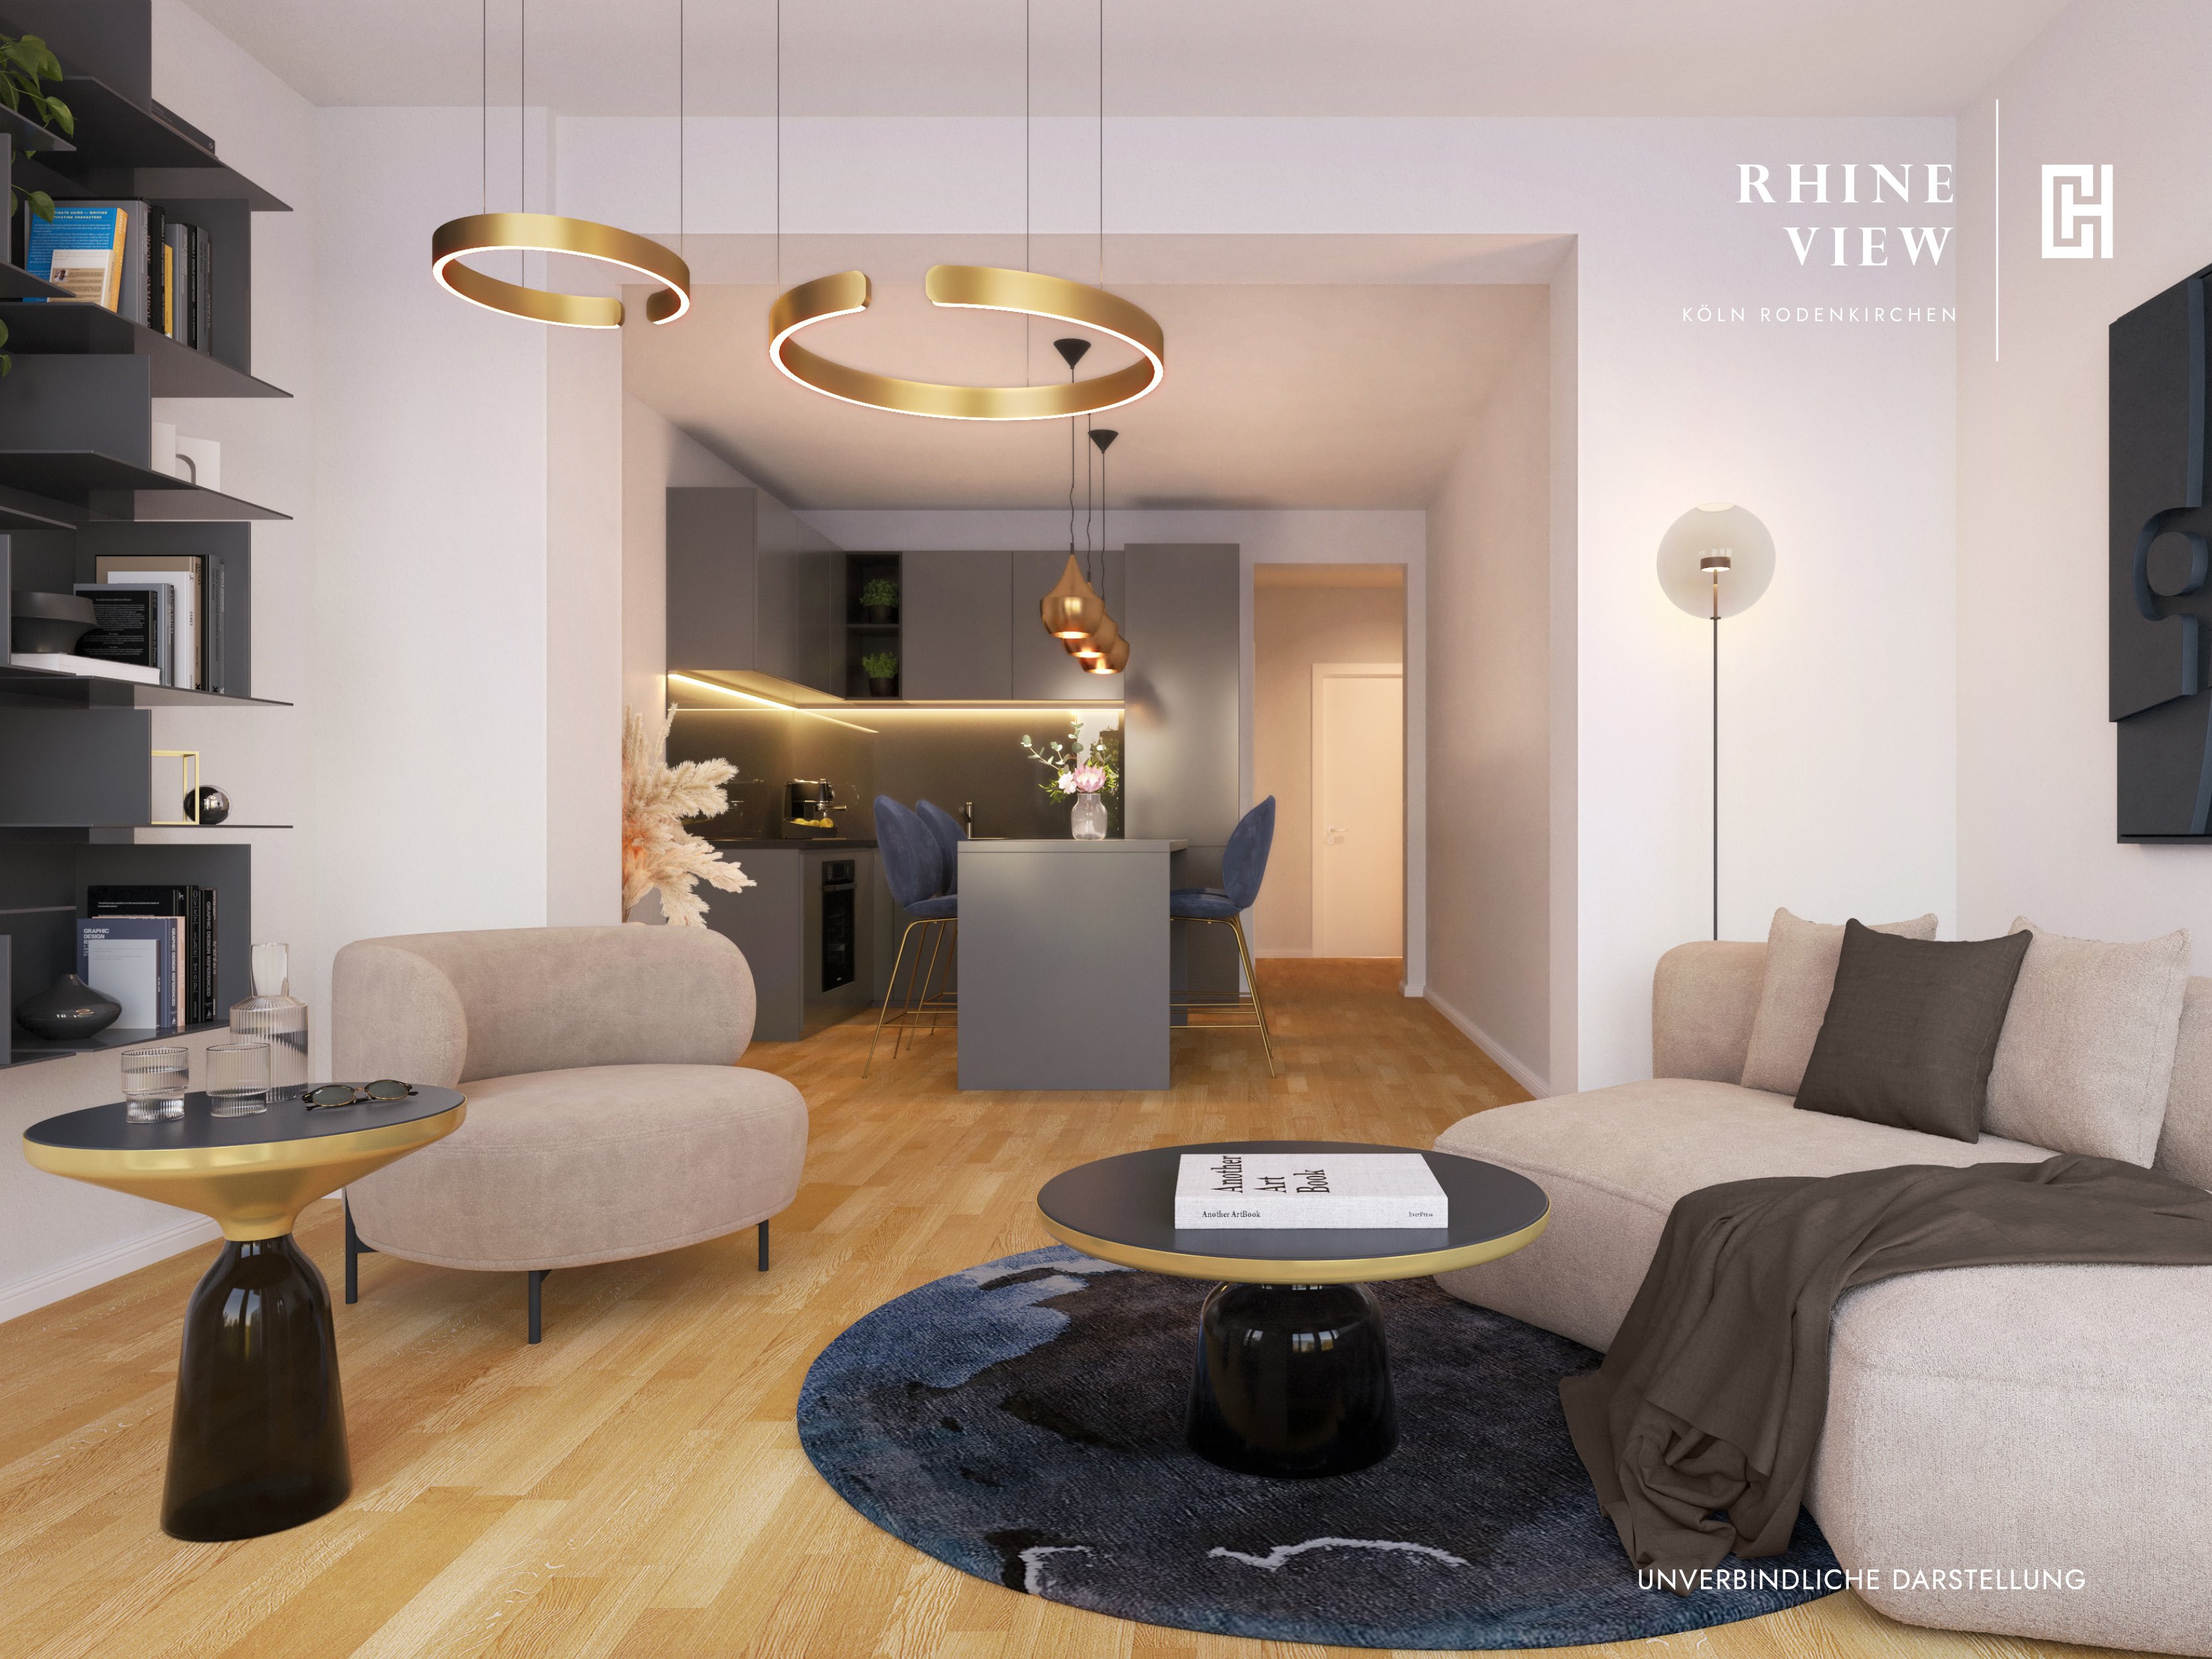 Image new build property Rhineview, Cologne